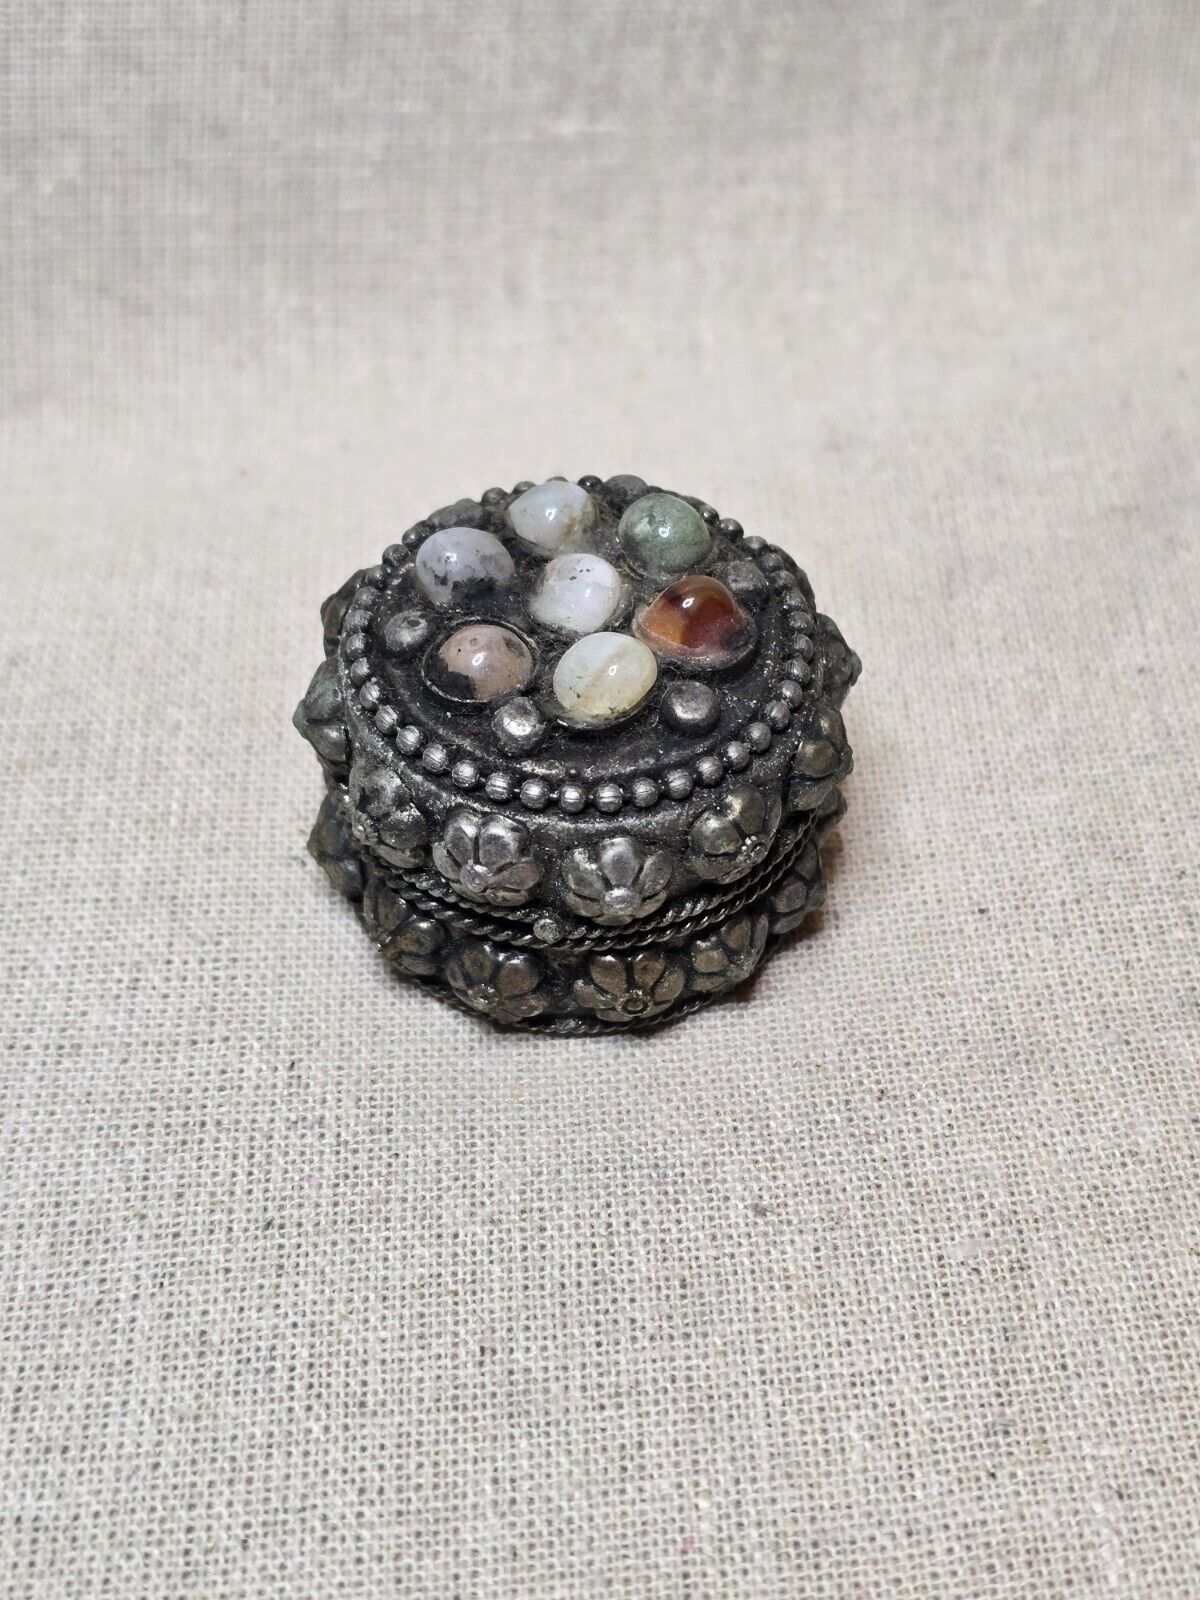 Vintage Trinket Box Hand Made Ornate Silverplated Small With Gemstones